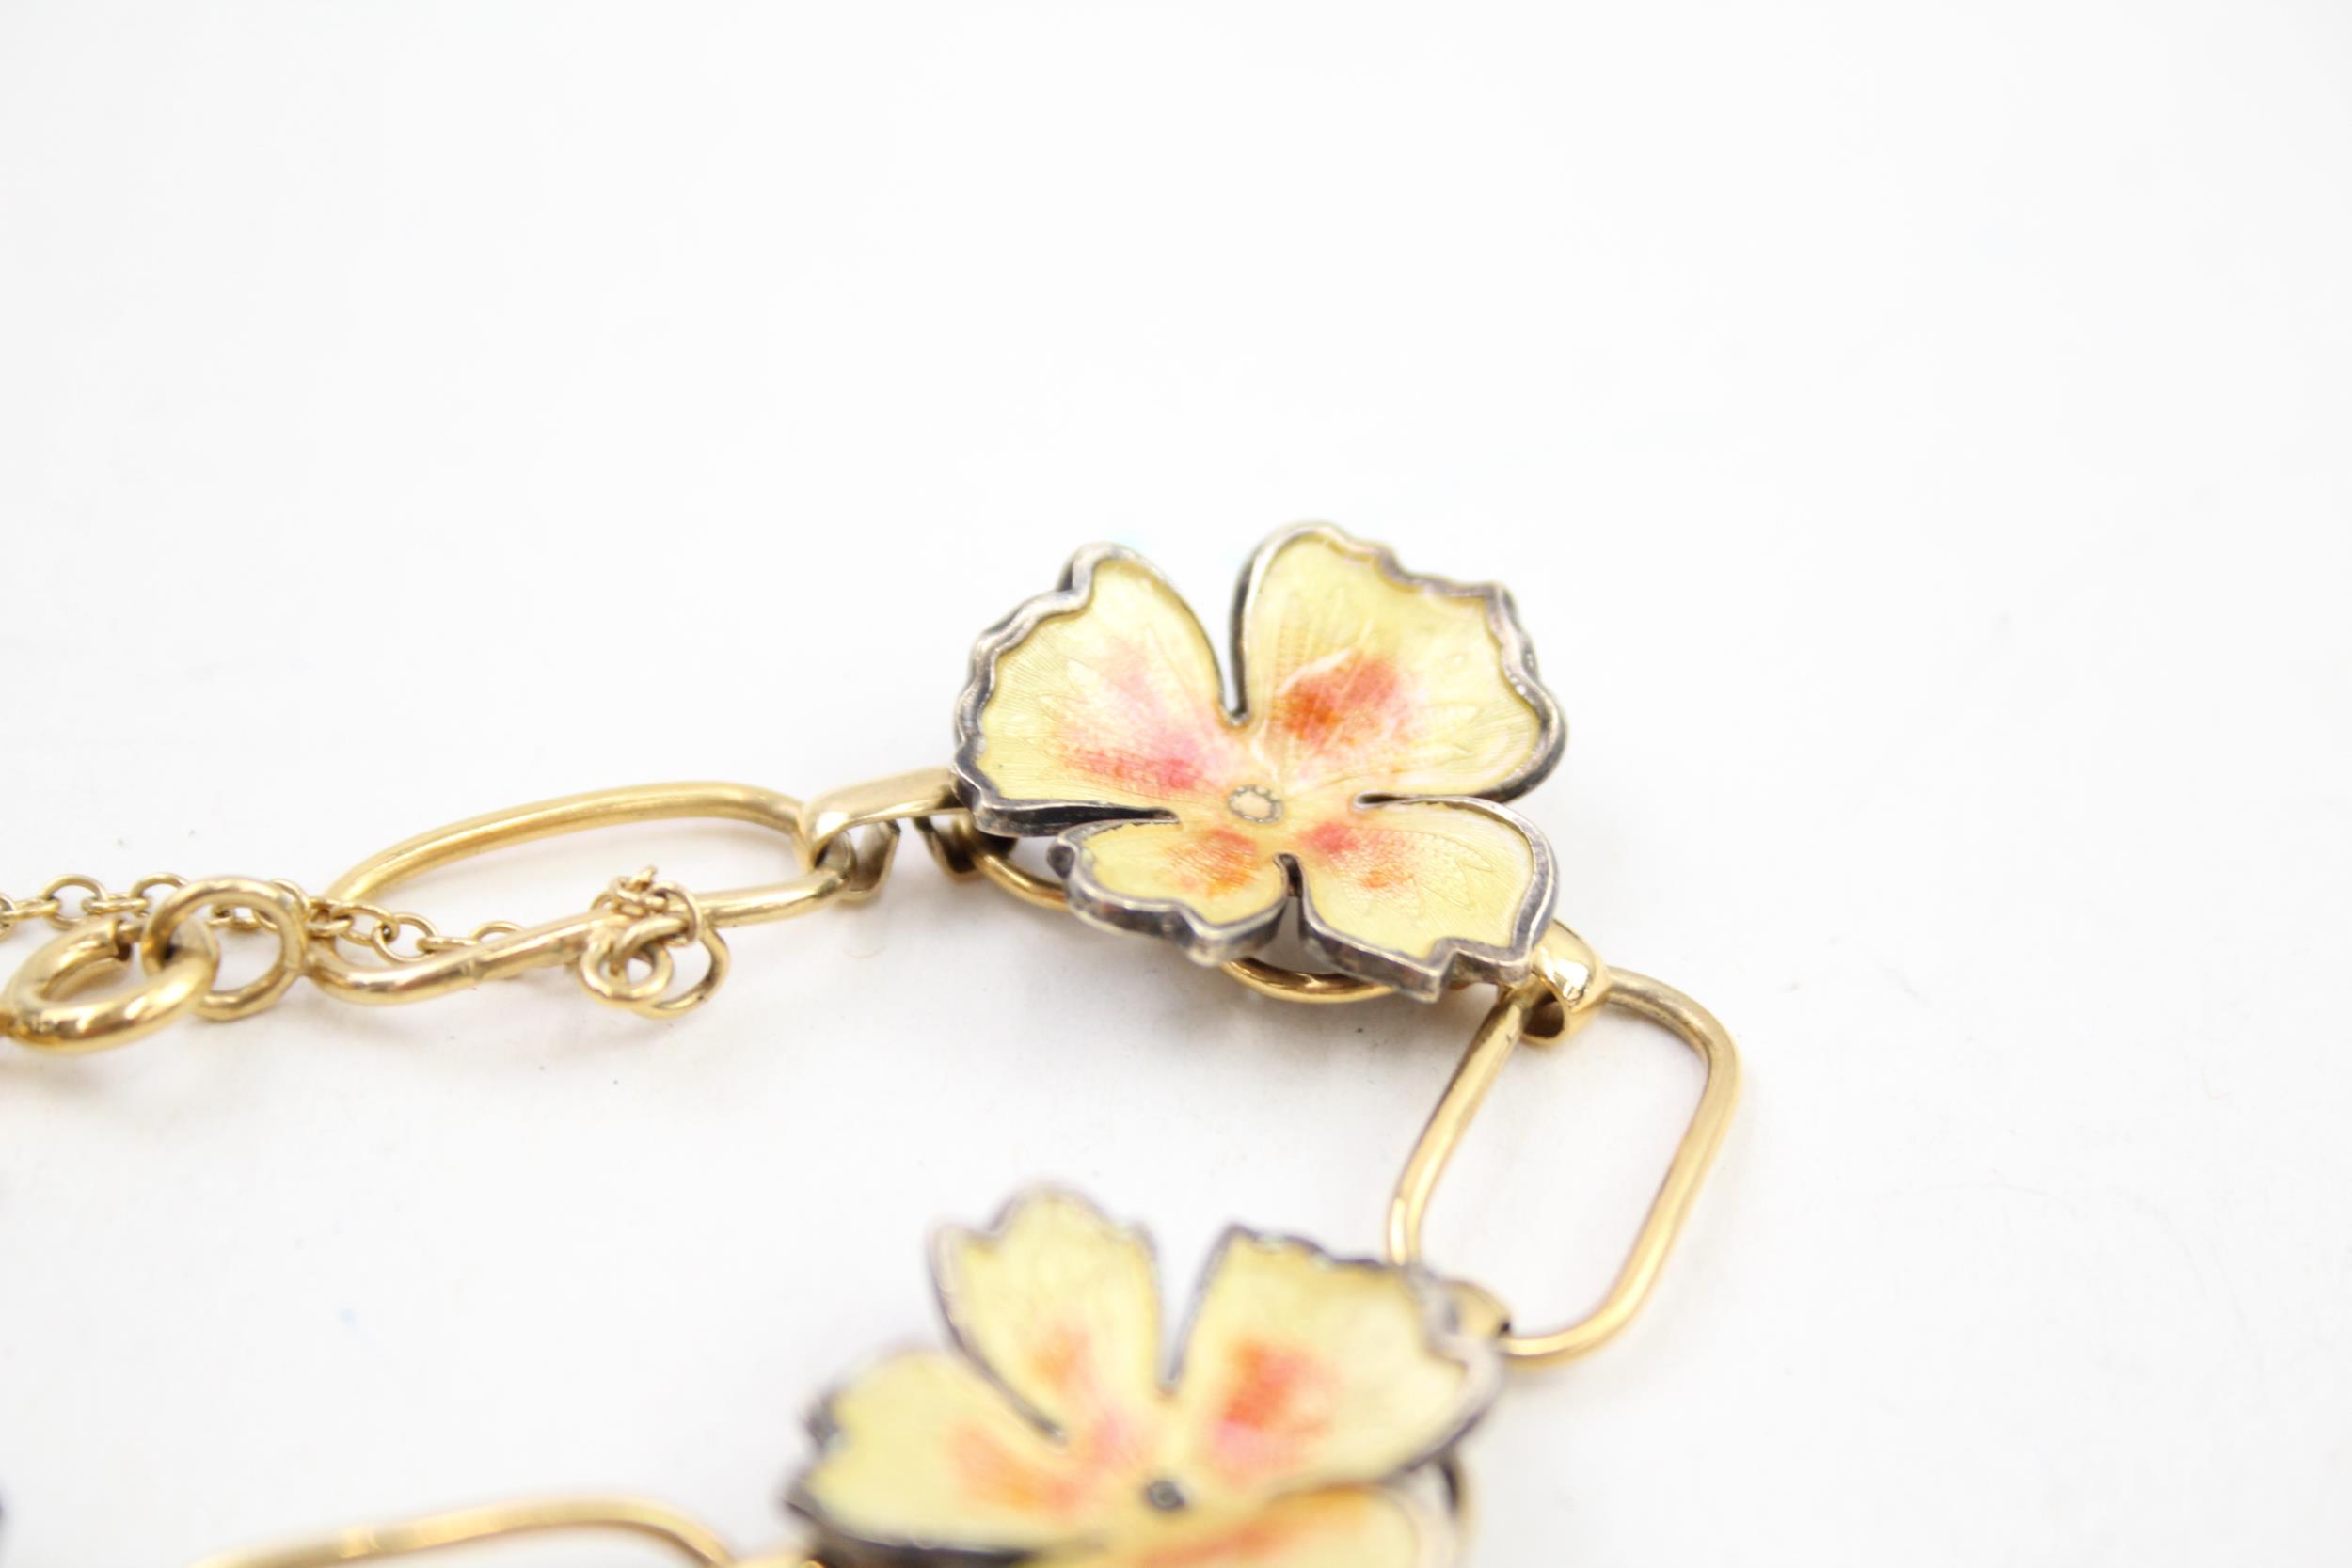 A mid century gold plated and silver enamel bracelet by Wells (18g) - Image 6 of 6